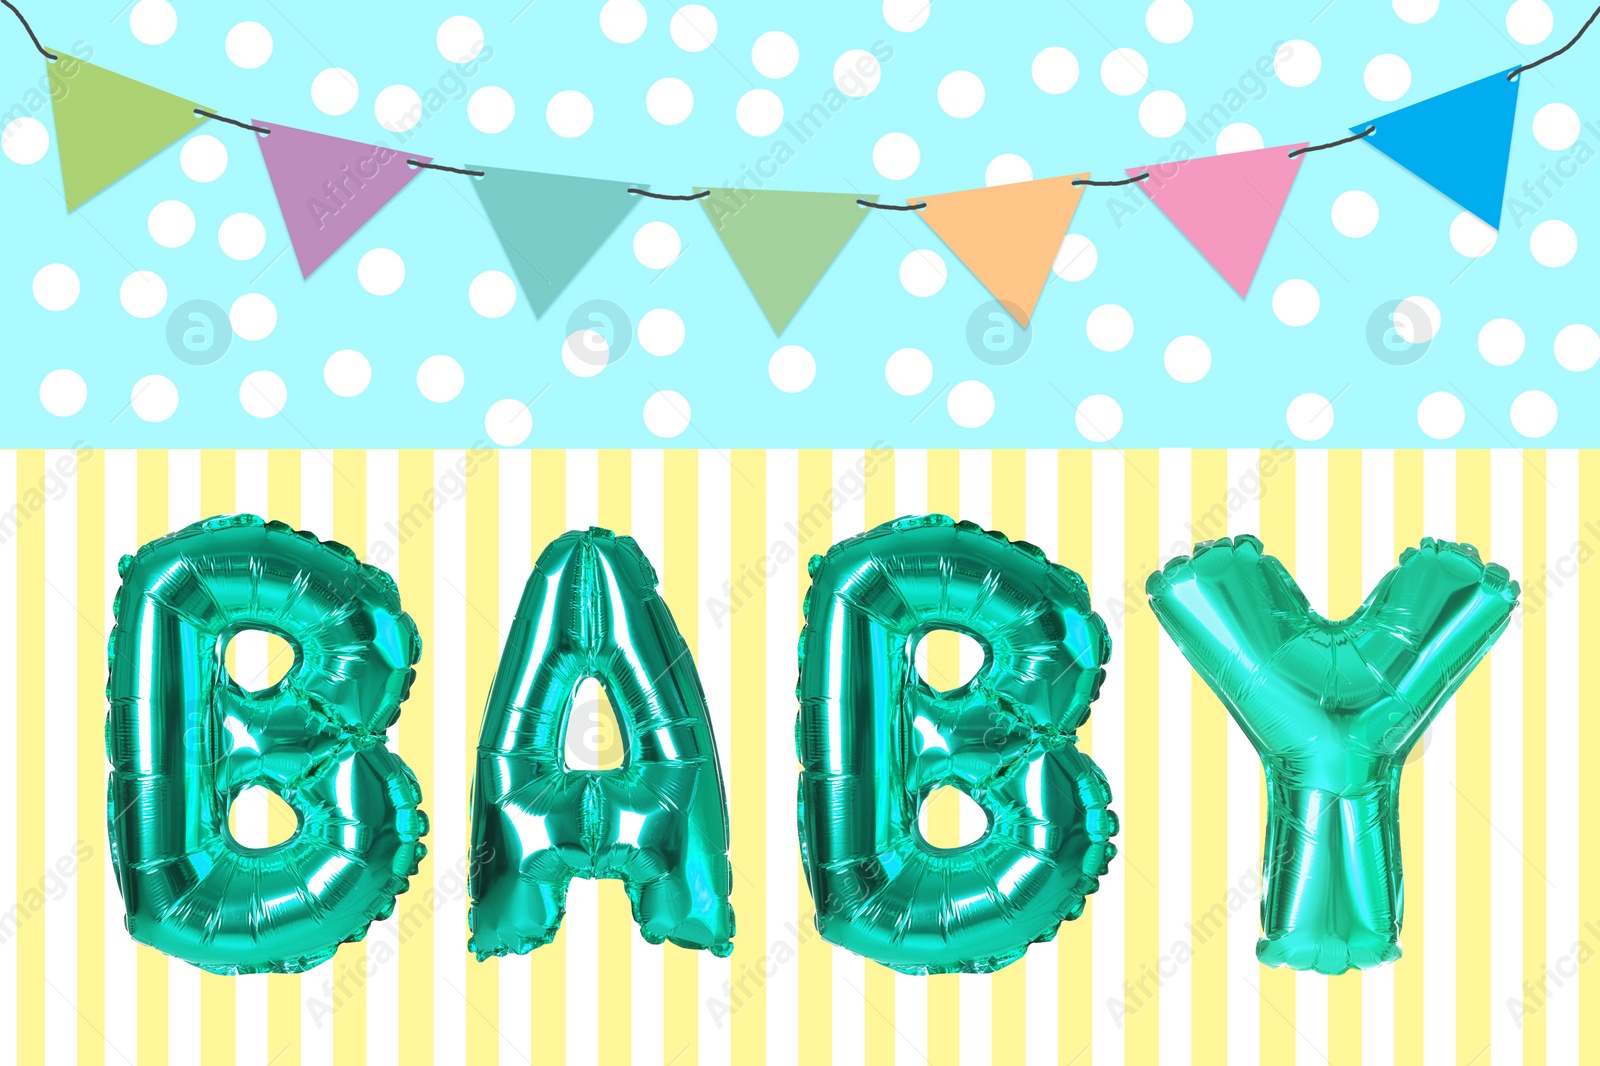 Image of Festive balloons and decoration for baby shower party